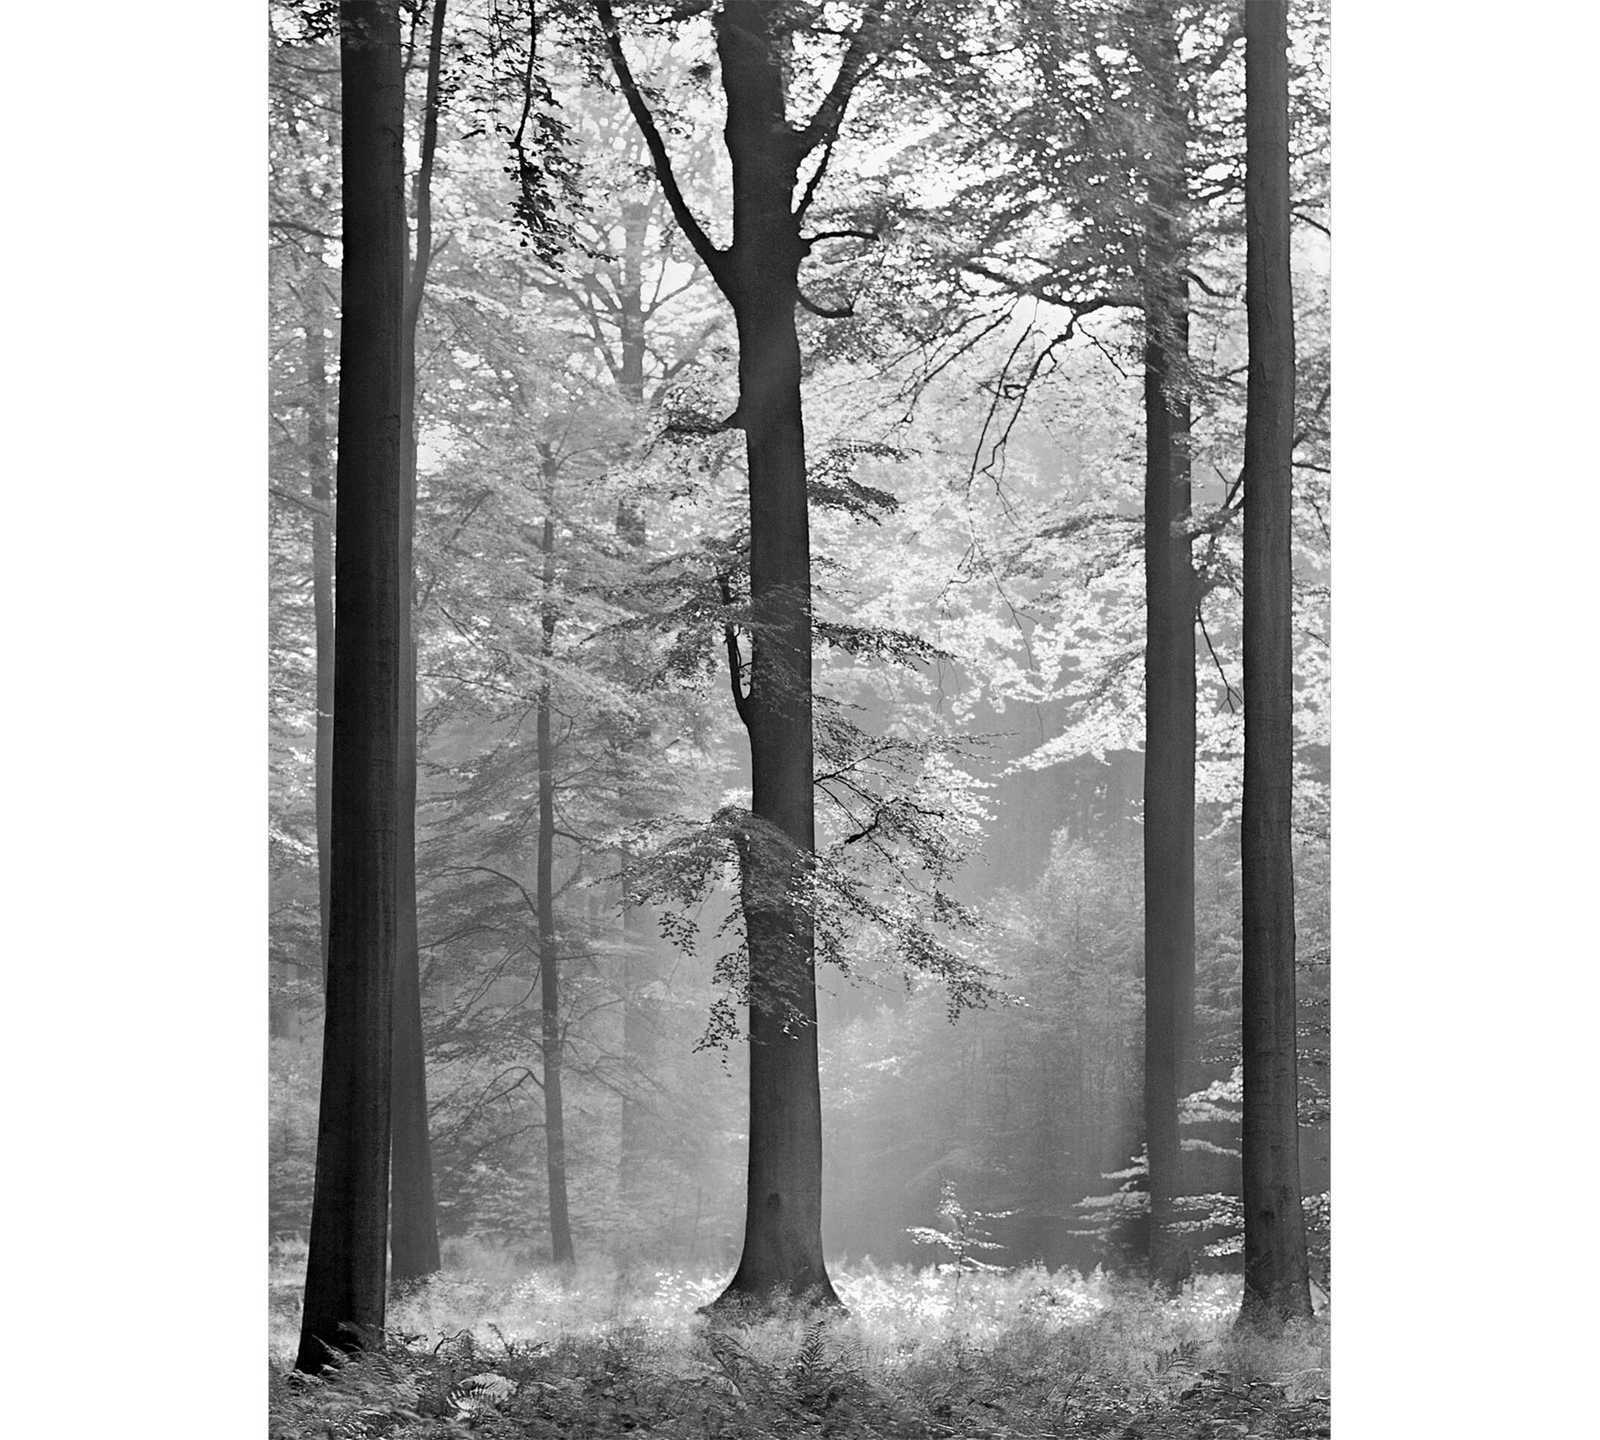         Black and white photo wallpaper leaf forest, portrait format
    